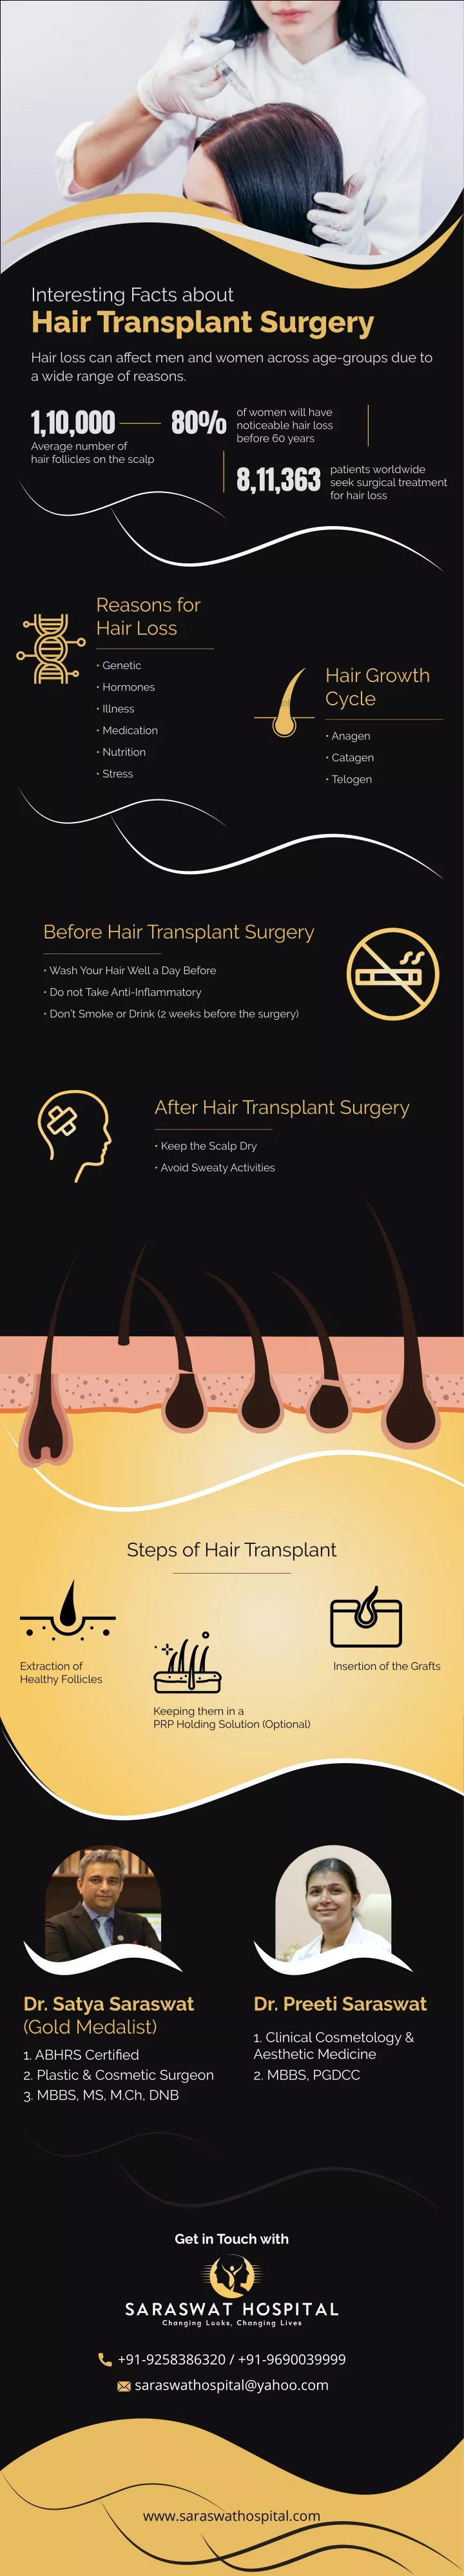 interesting facts about hair transplant surgery